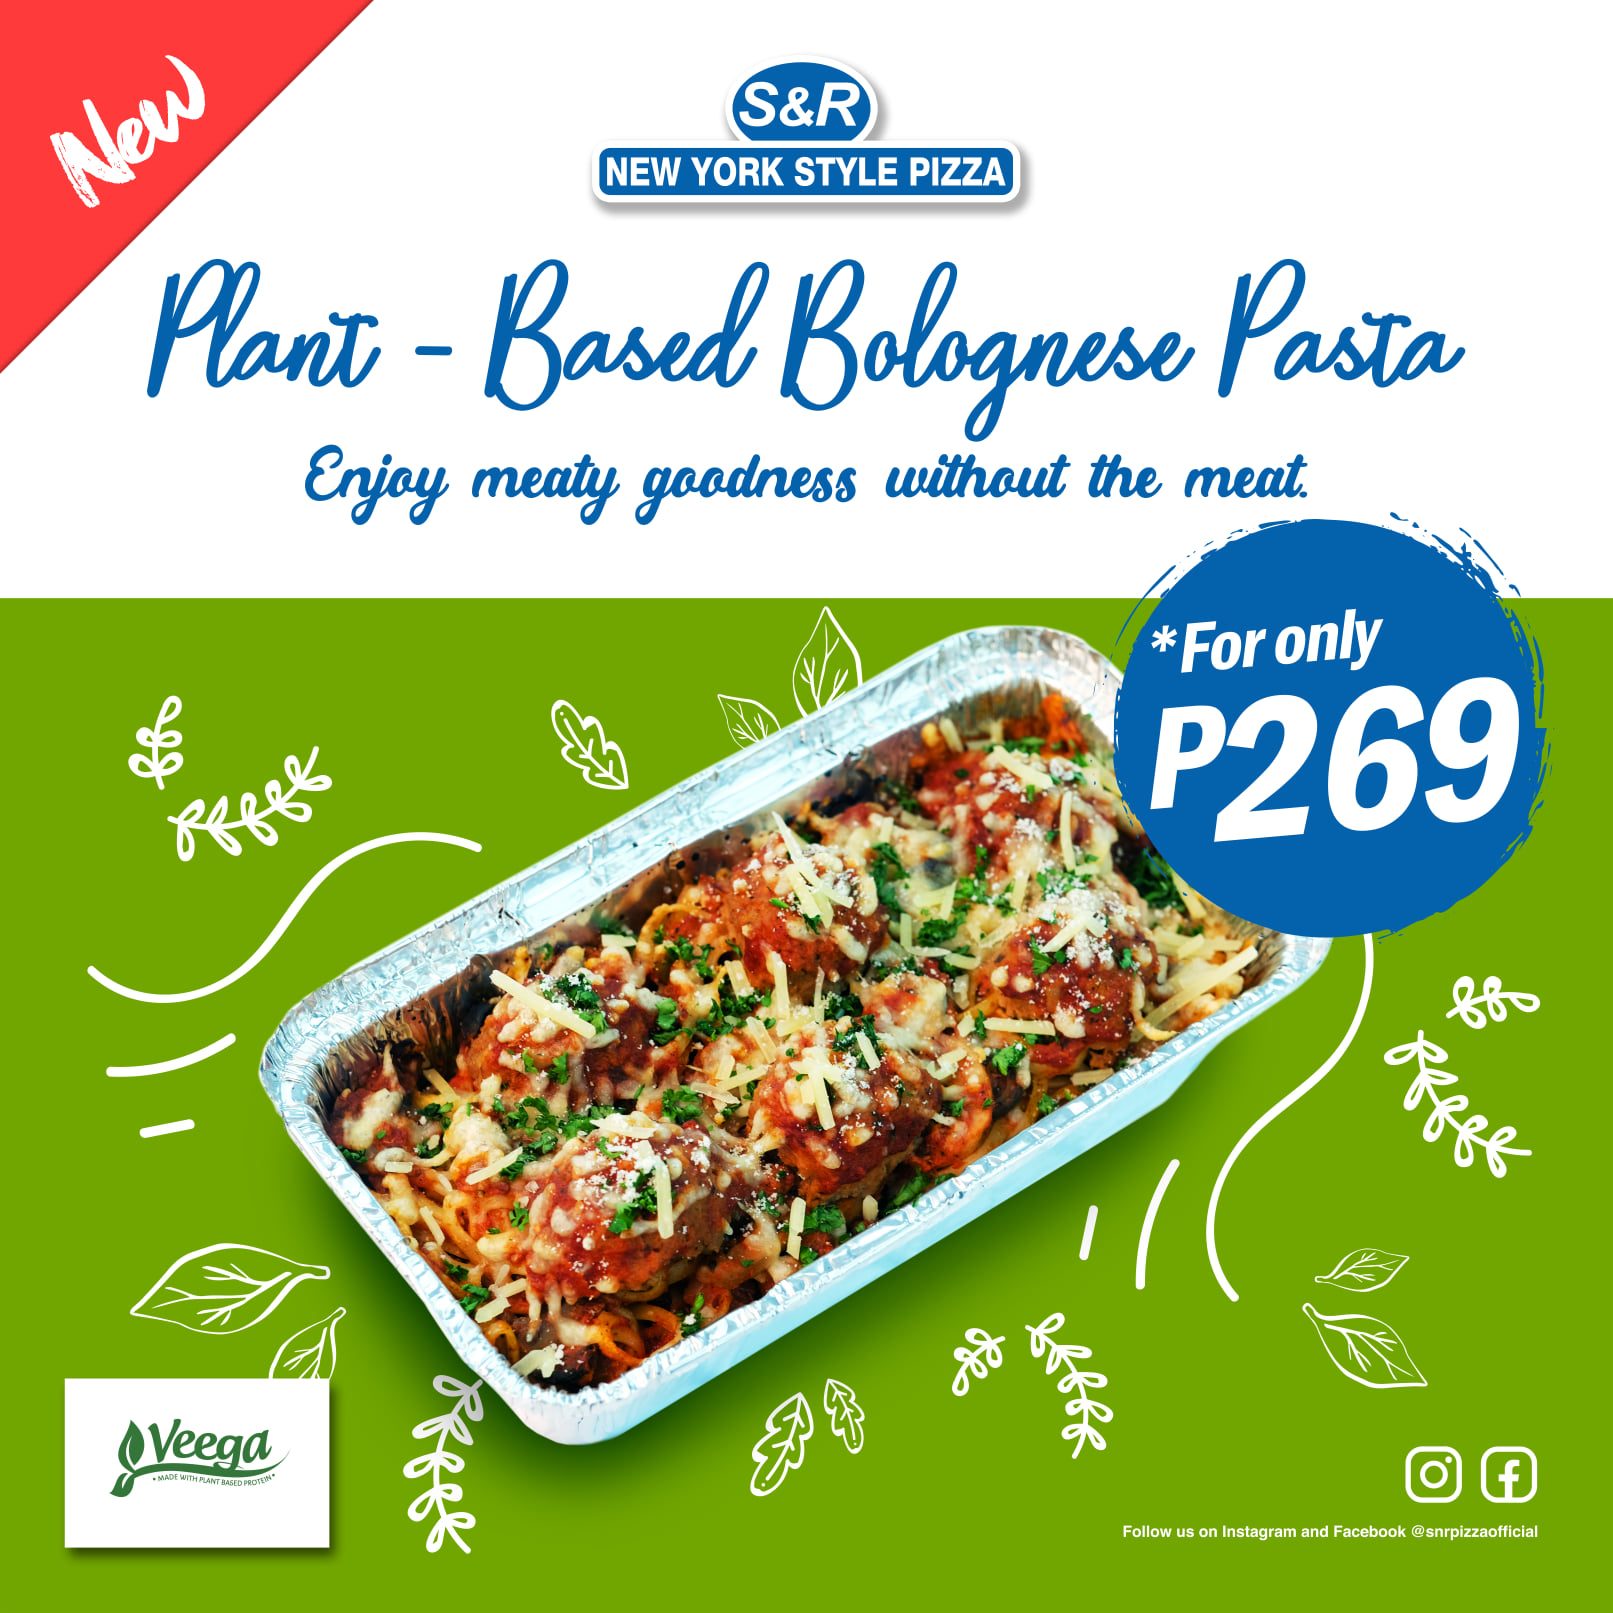 S&R launches new plant-based bolognese pasta